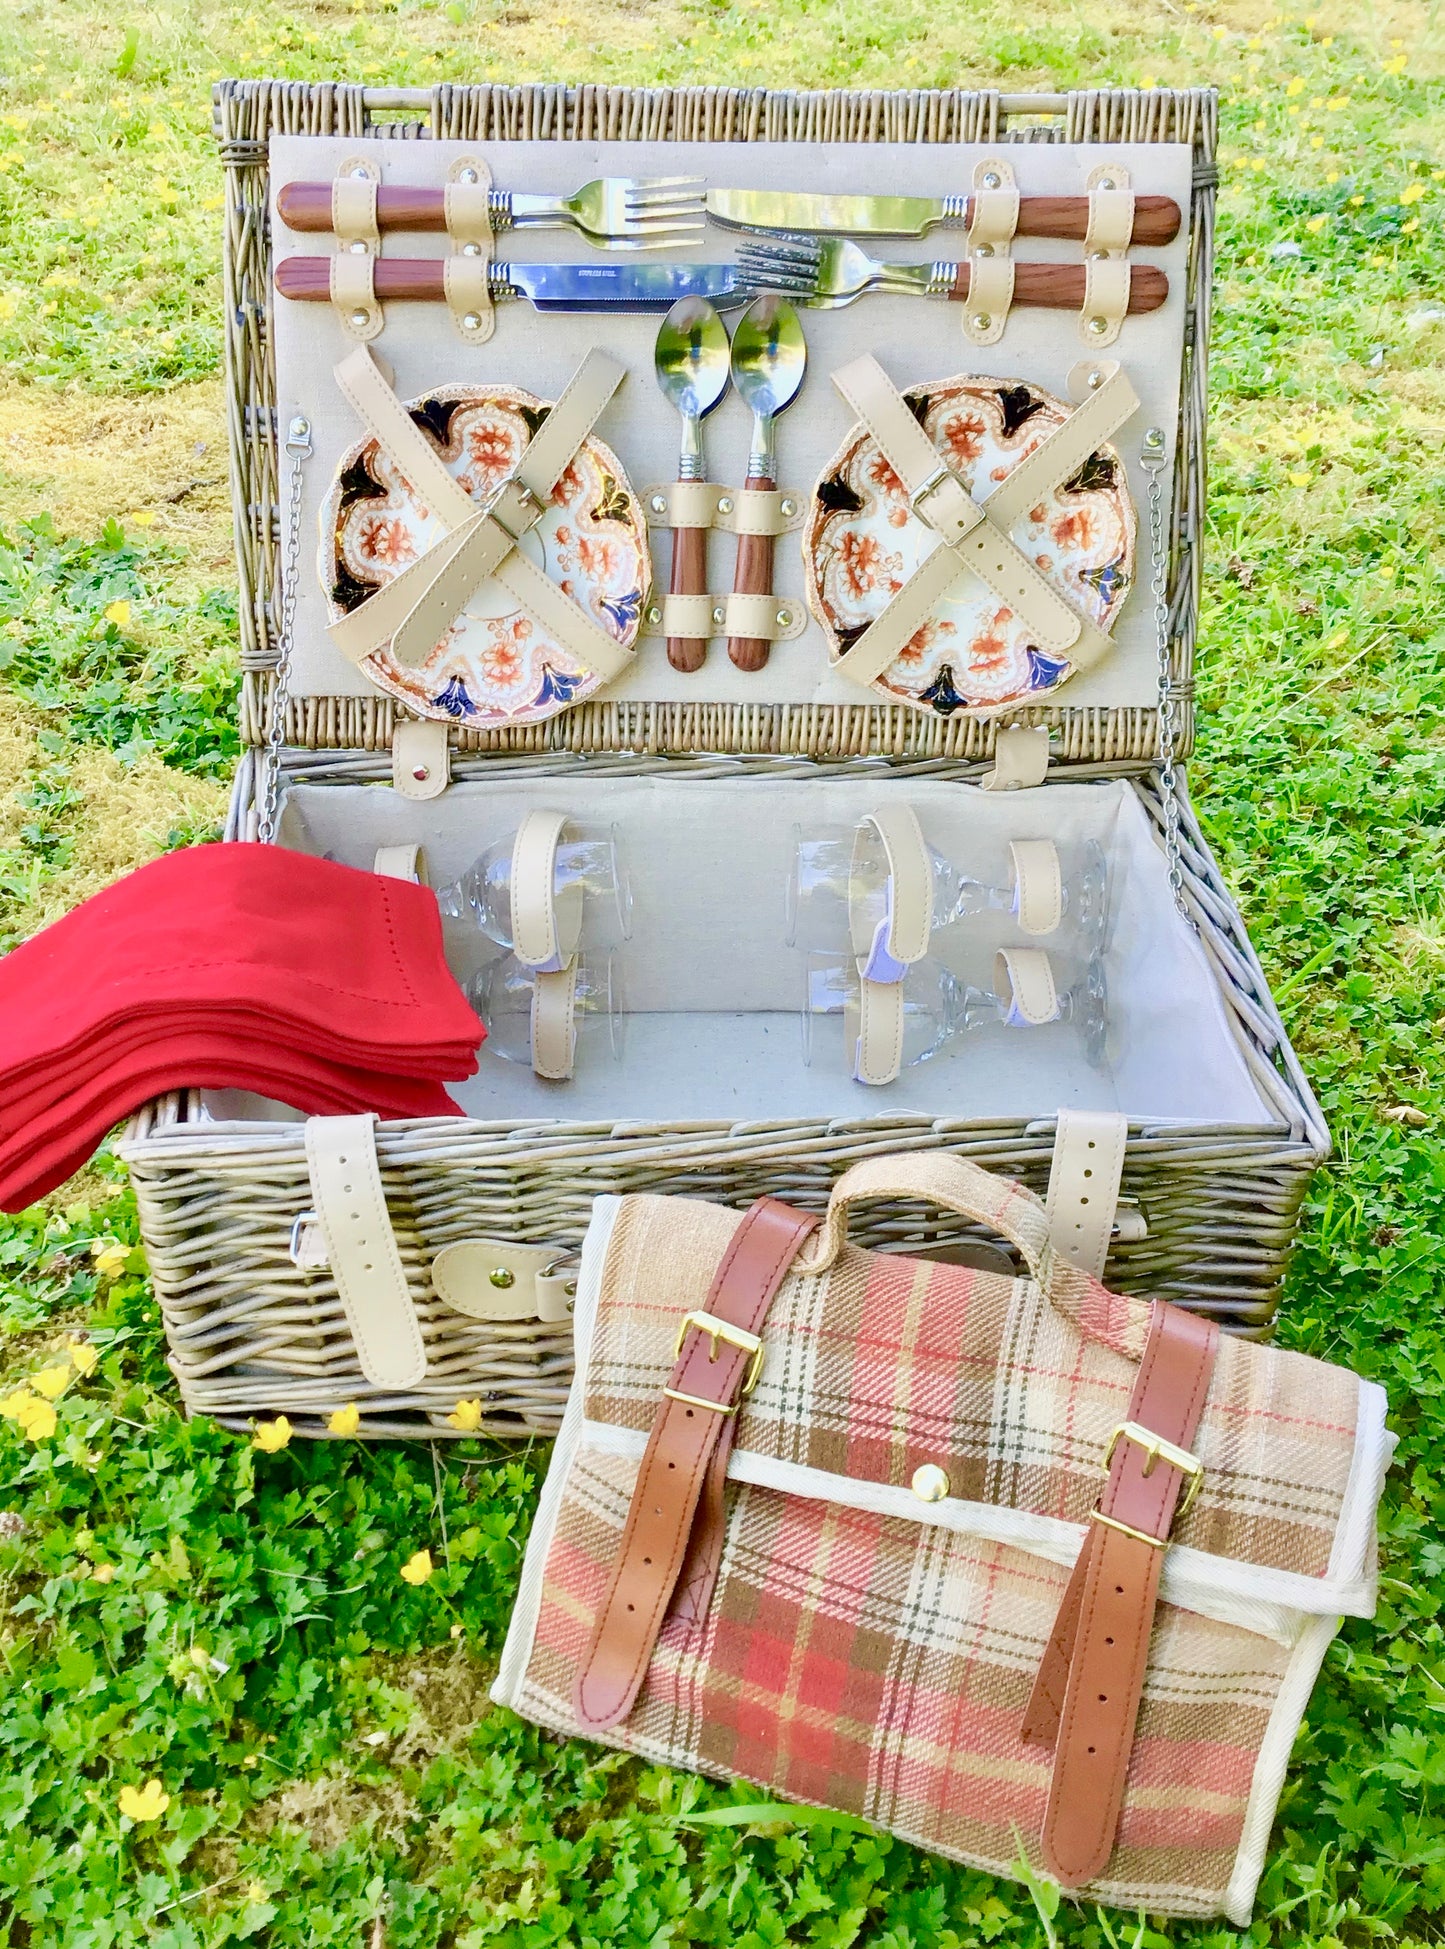 The Seymour - a fitted willow picnic hamper for 4